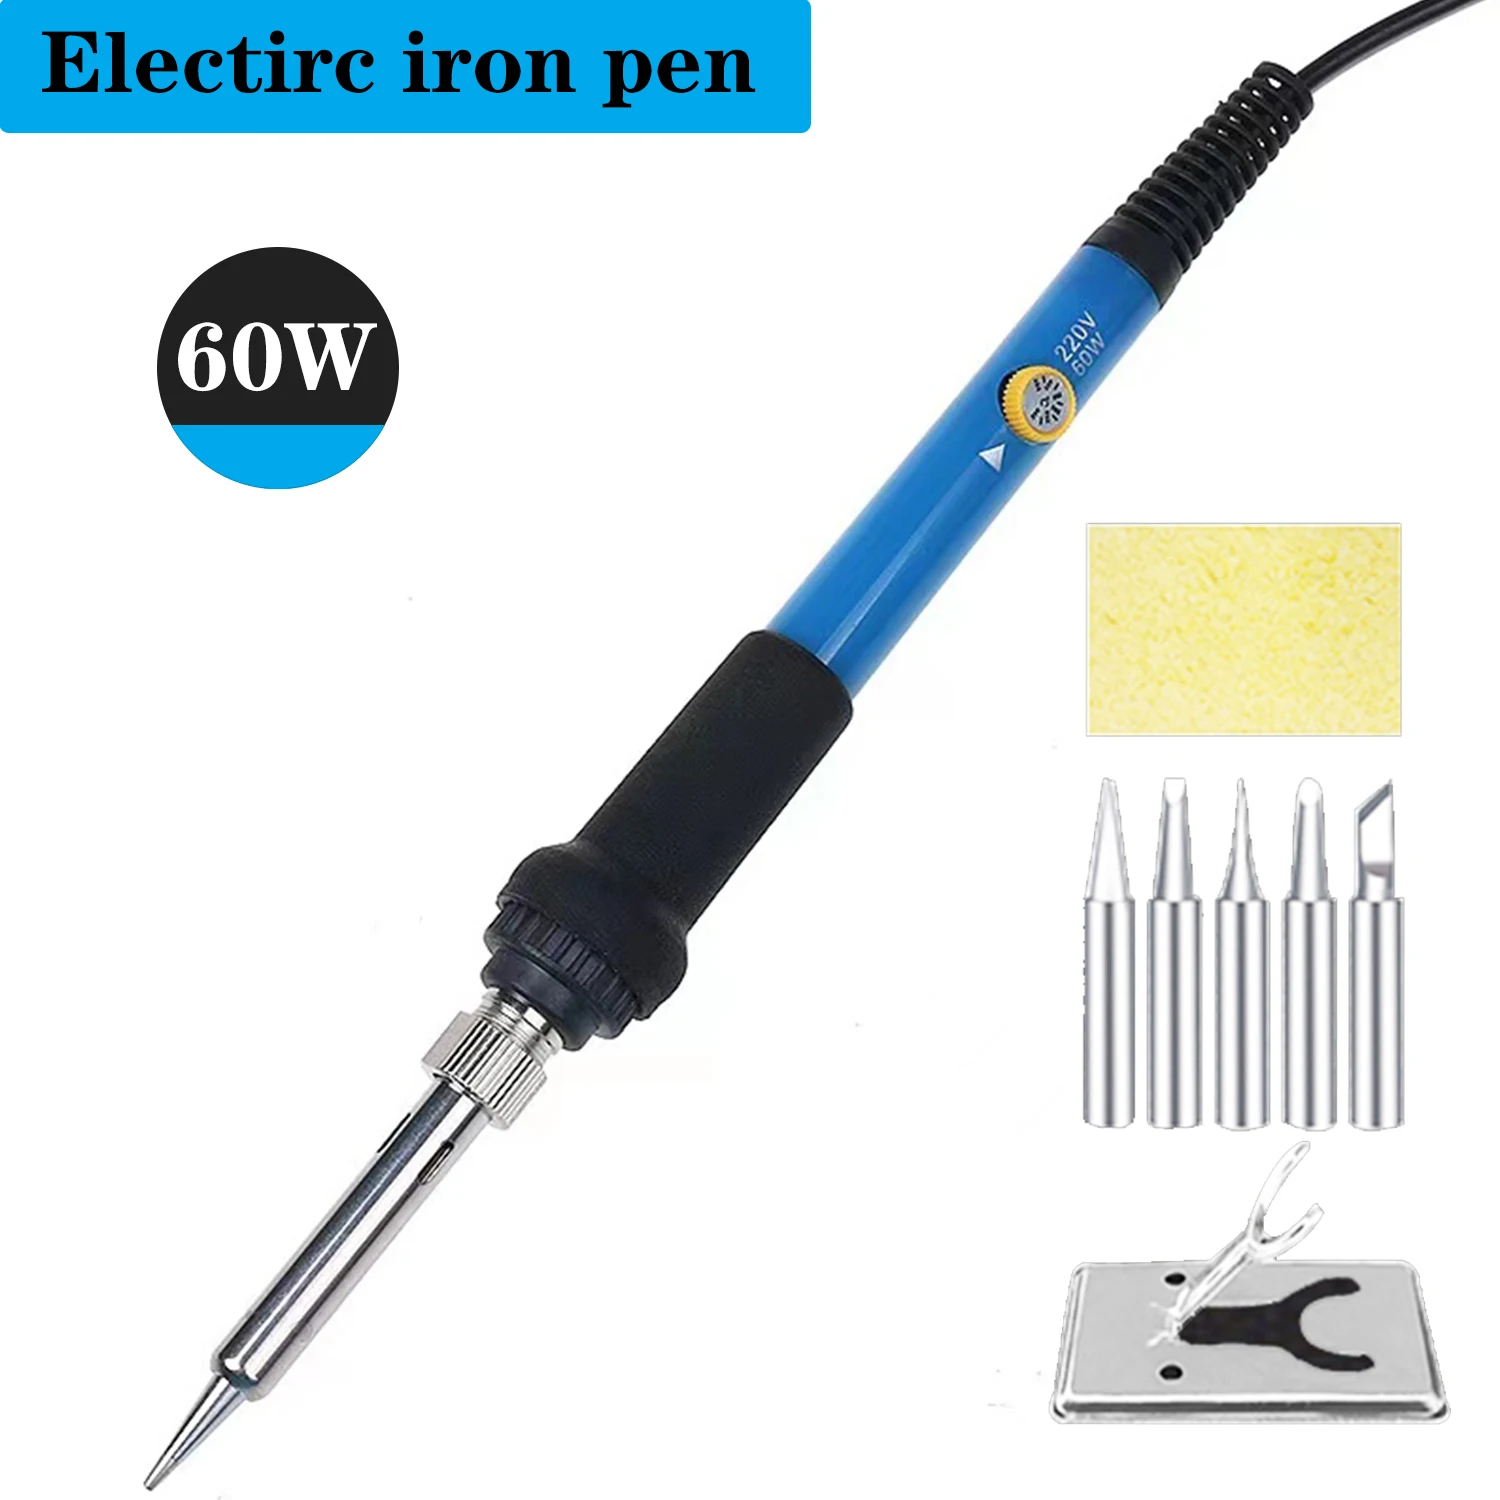 

New Adjustable Temperature Electric Soldering Iron 220V 110V 60W 80W Welding Solder Rework Station Heat Pencil Tips Repair Tool